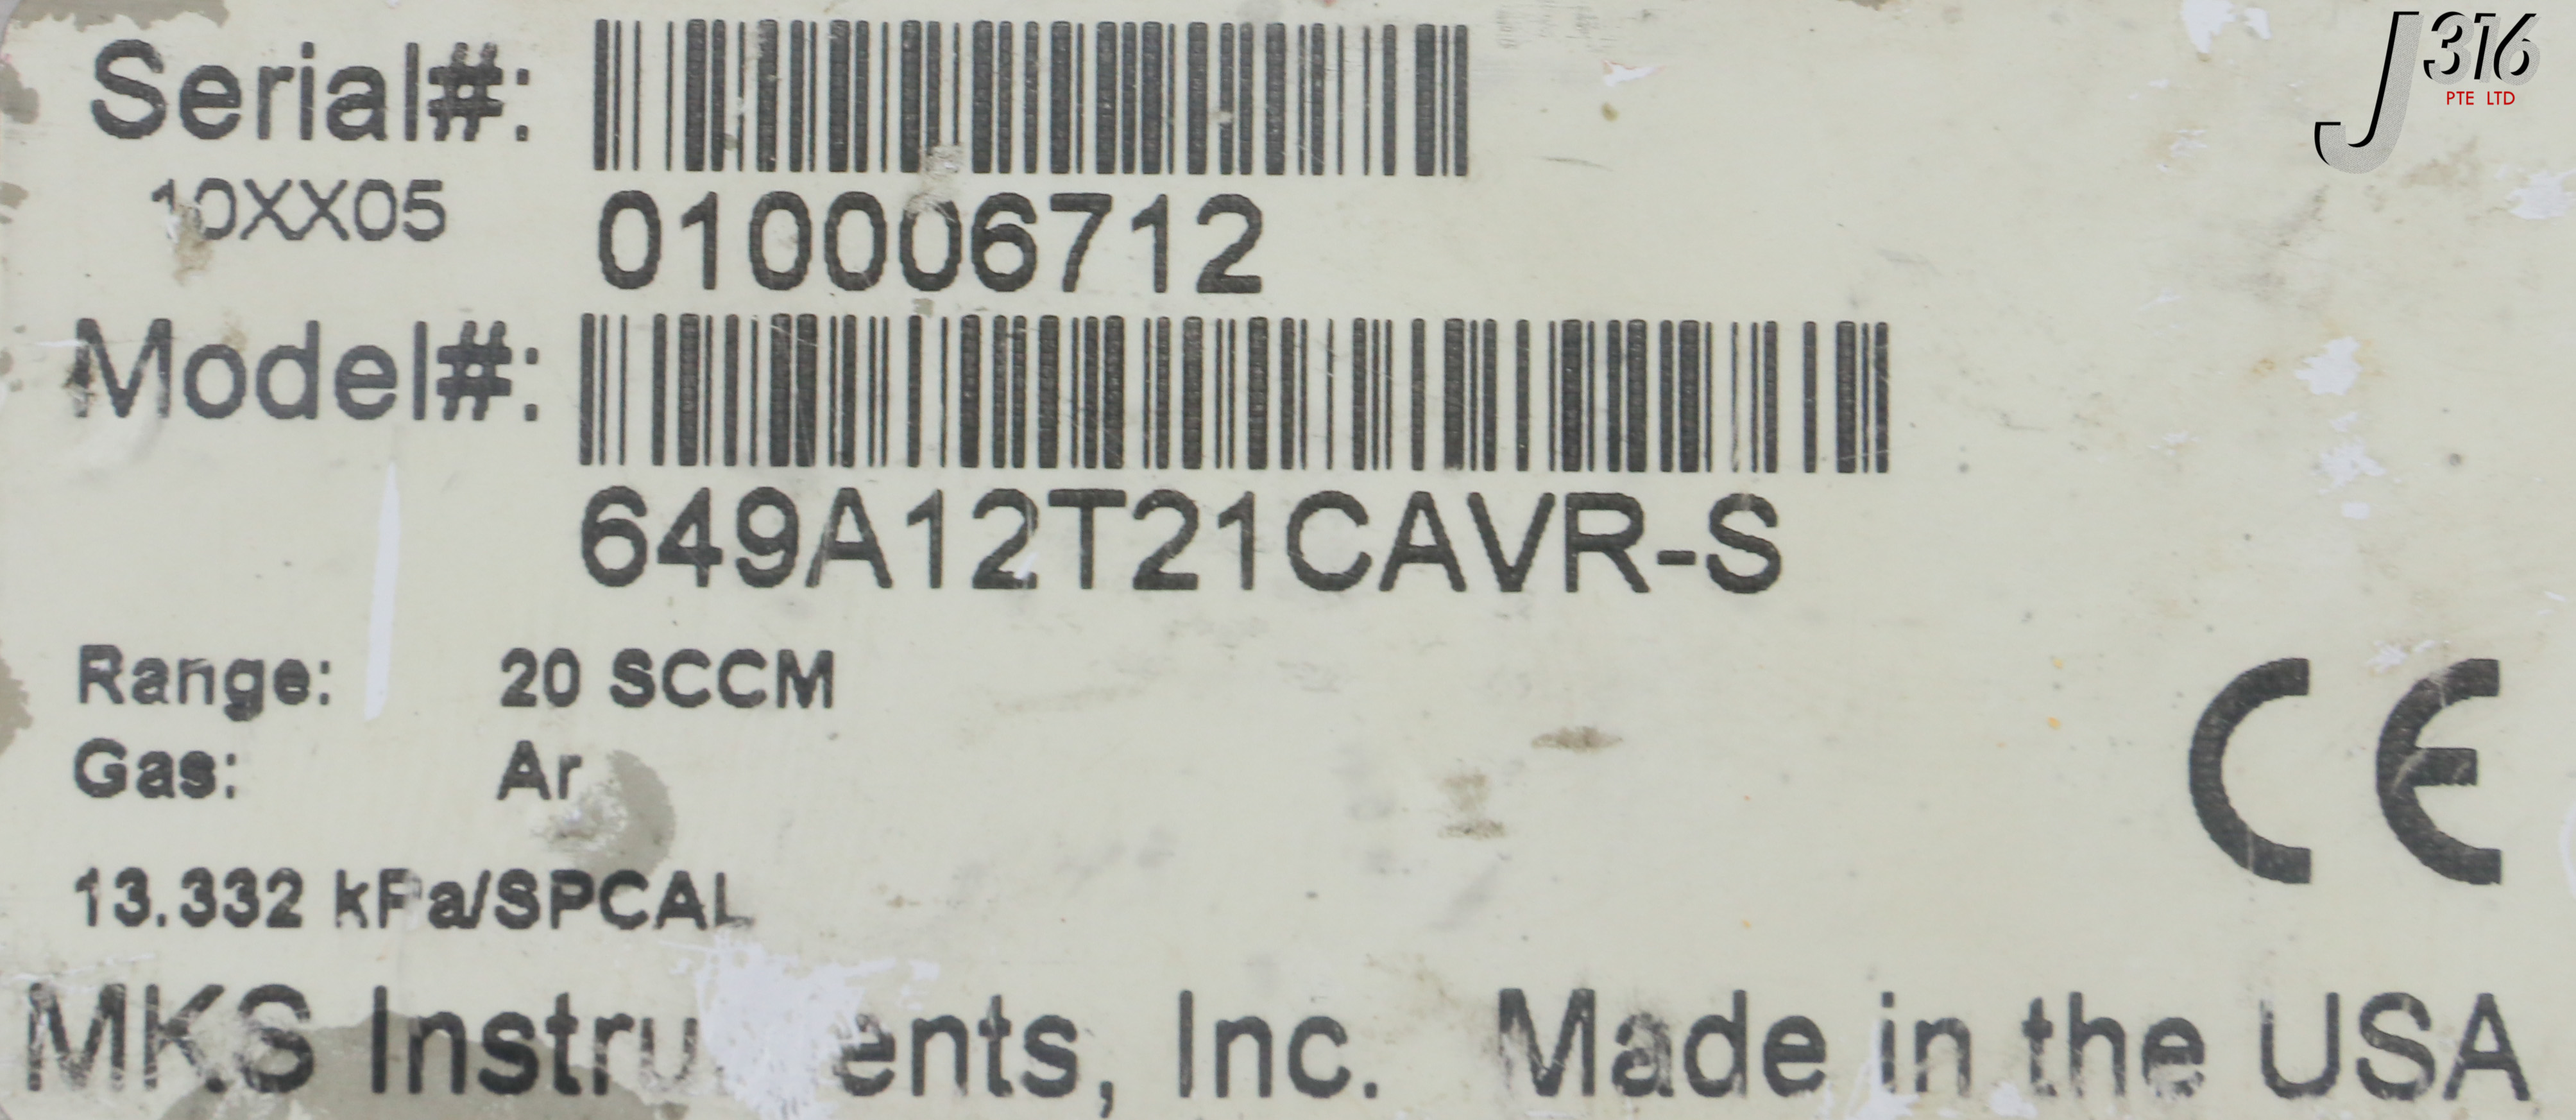 6654 MKS MFC, TYPE 649, PRESSURE CONTROLLER 649A12T21CAVR-S – J316Gallery